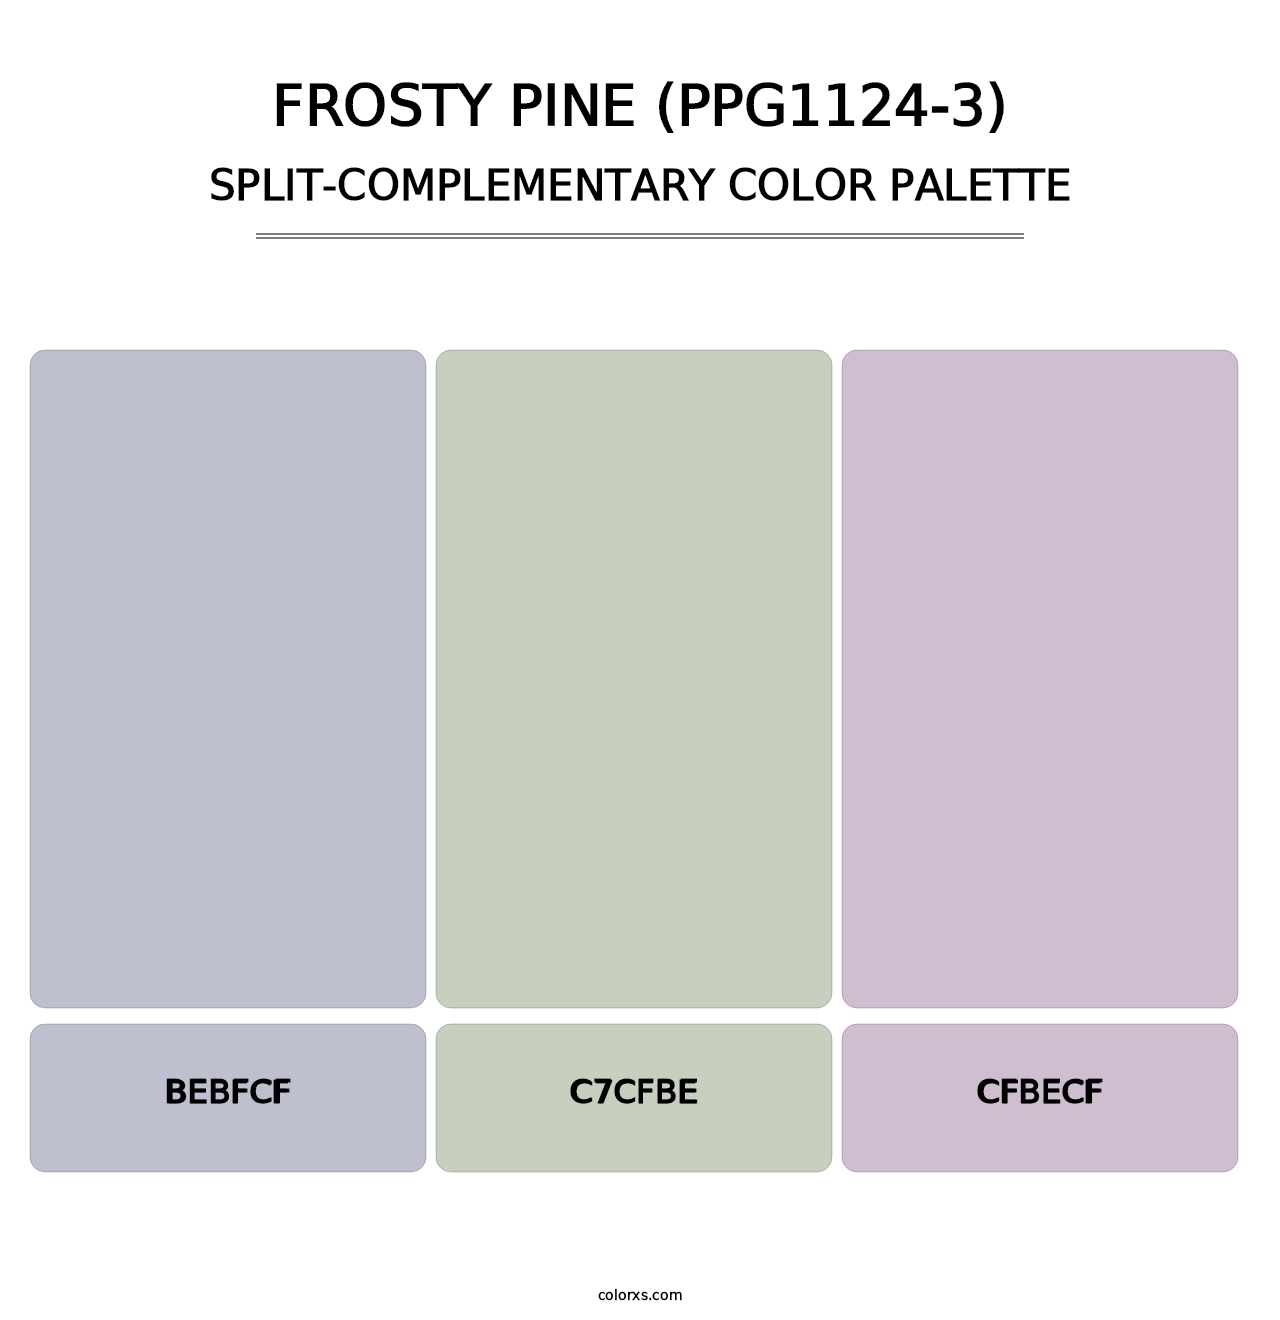 Frosty Pine (PPG1124-3) - Split-Complementary Color Palette